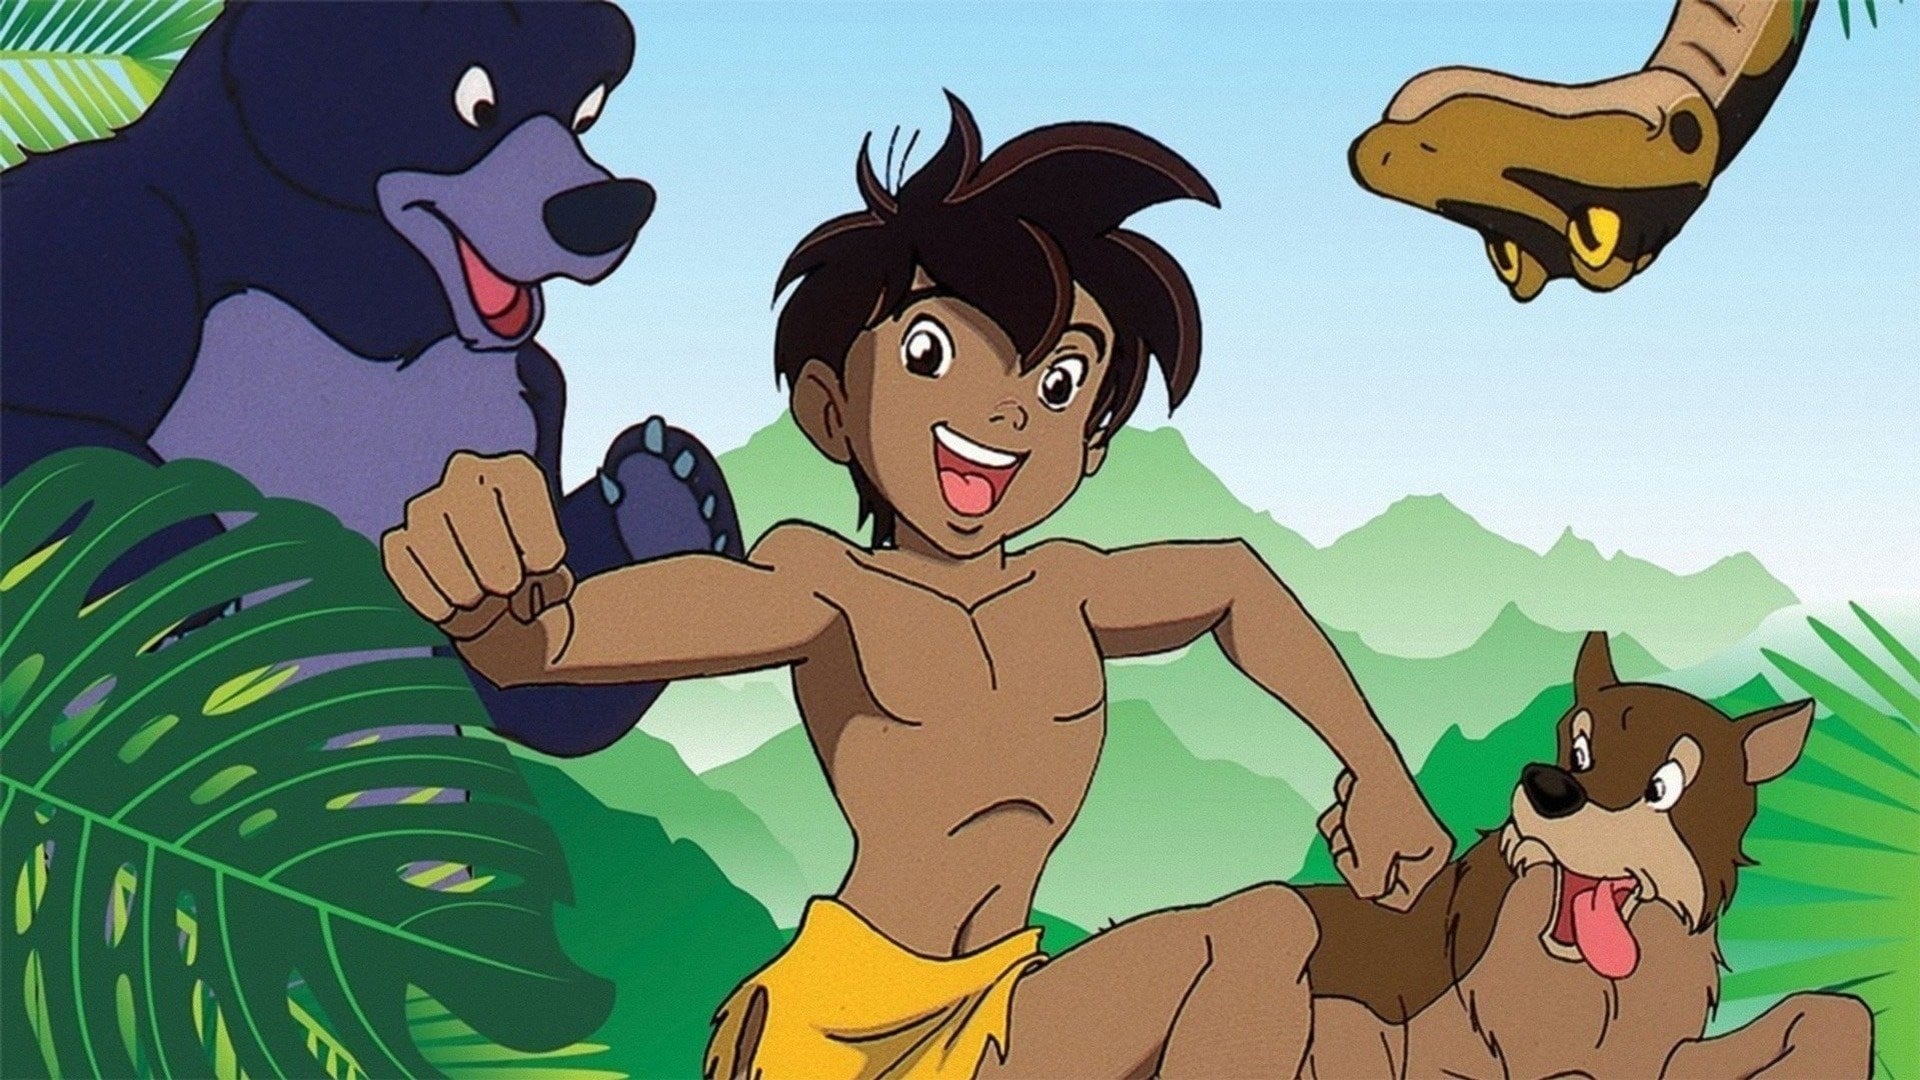 Join young Mowgli, and his animal friends Bagheera and Baloo, on their adve...